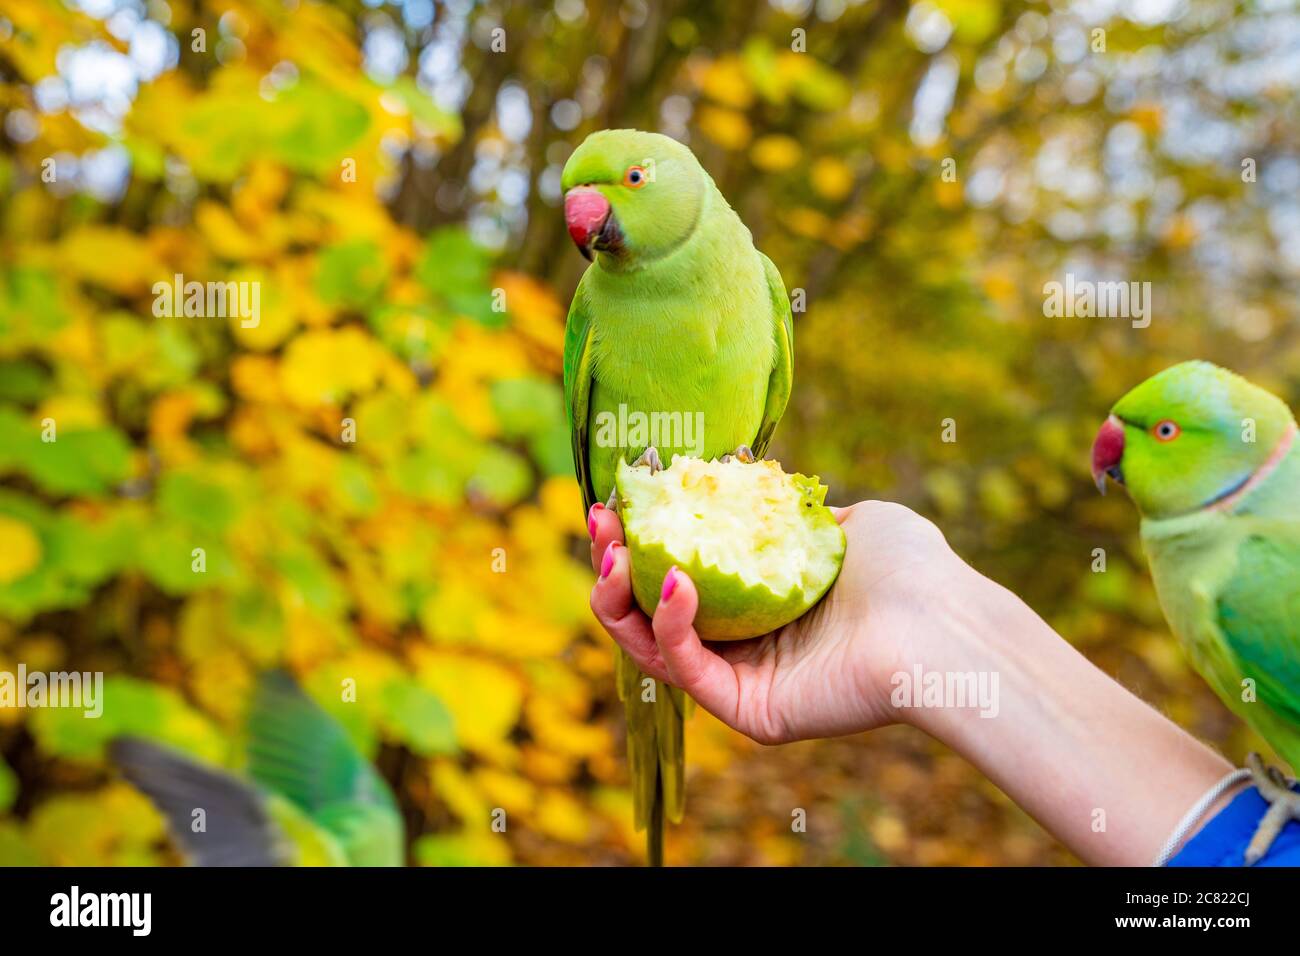 Closeup of the green-colored parrots eating fruit out of a female's hands Stock Photo